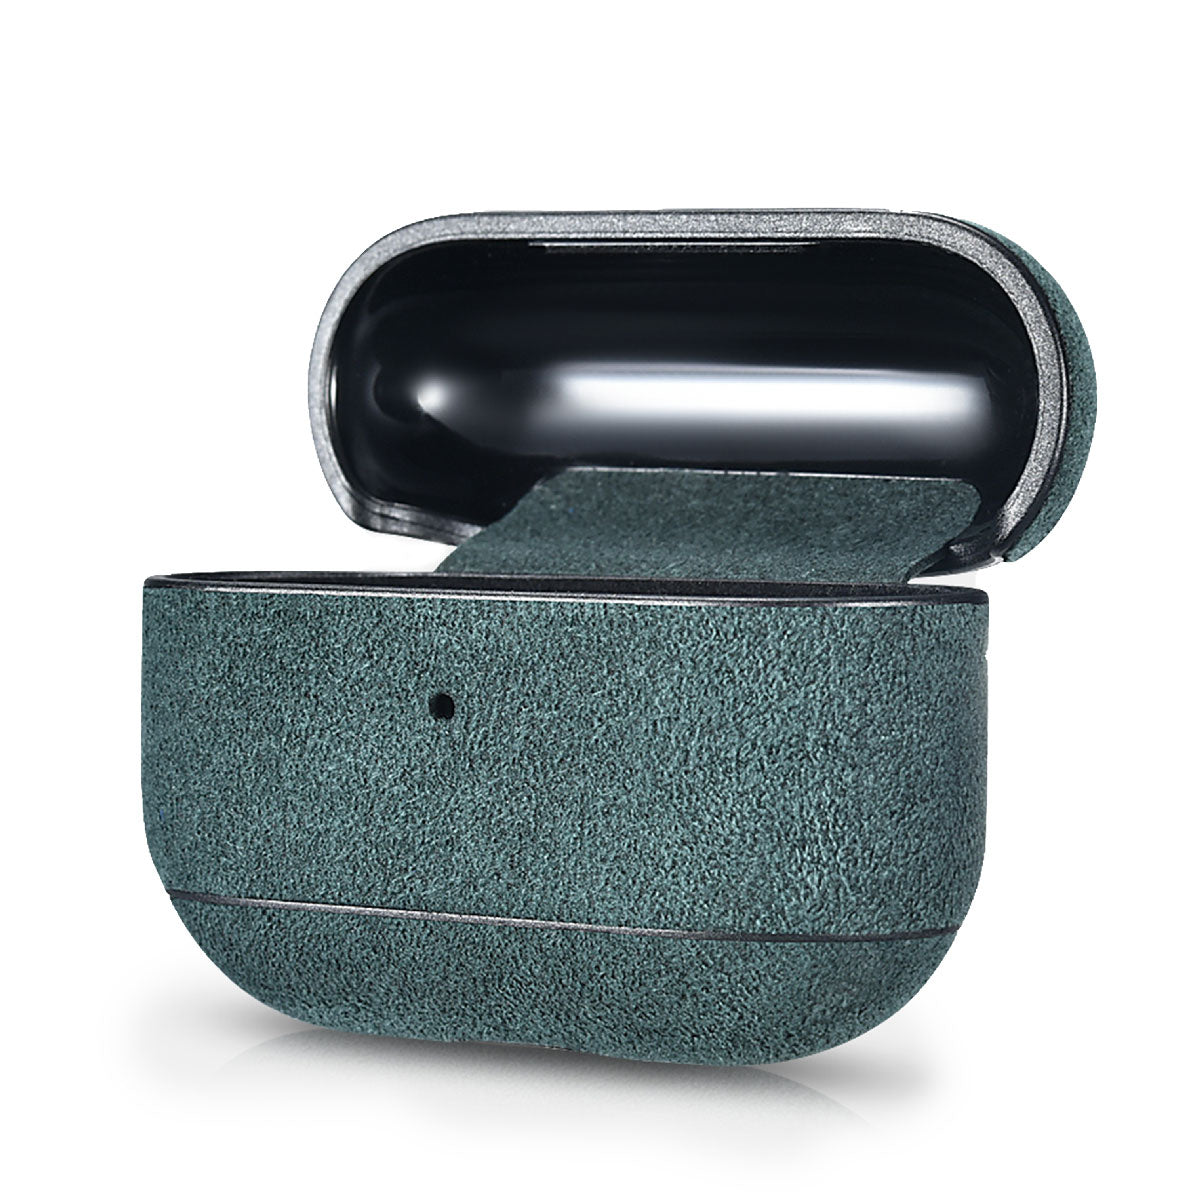 Leather case for Apple AirPods and Airpods Pro - Alcantara suede calf